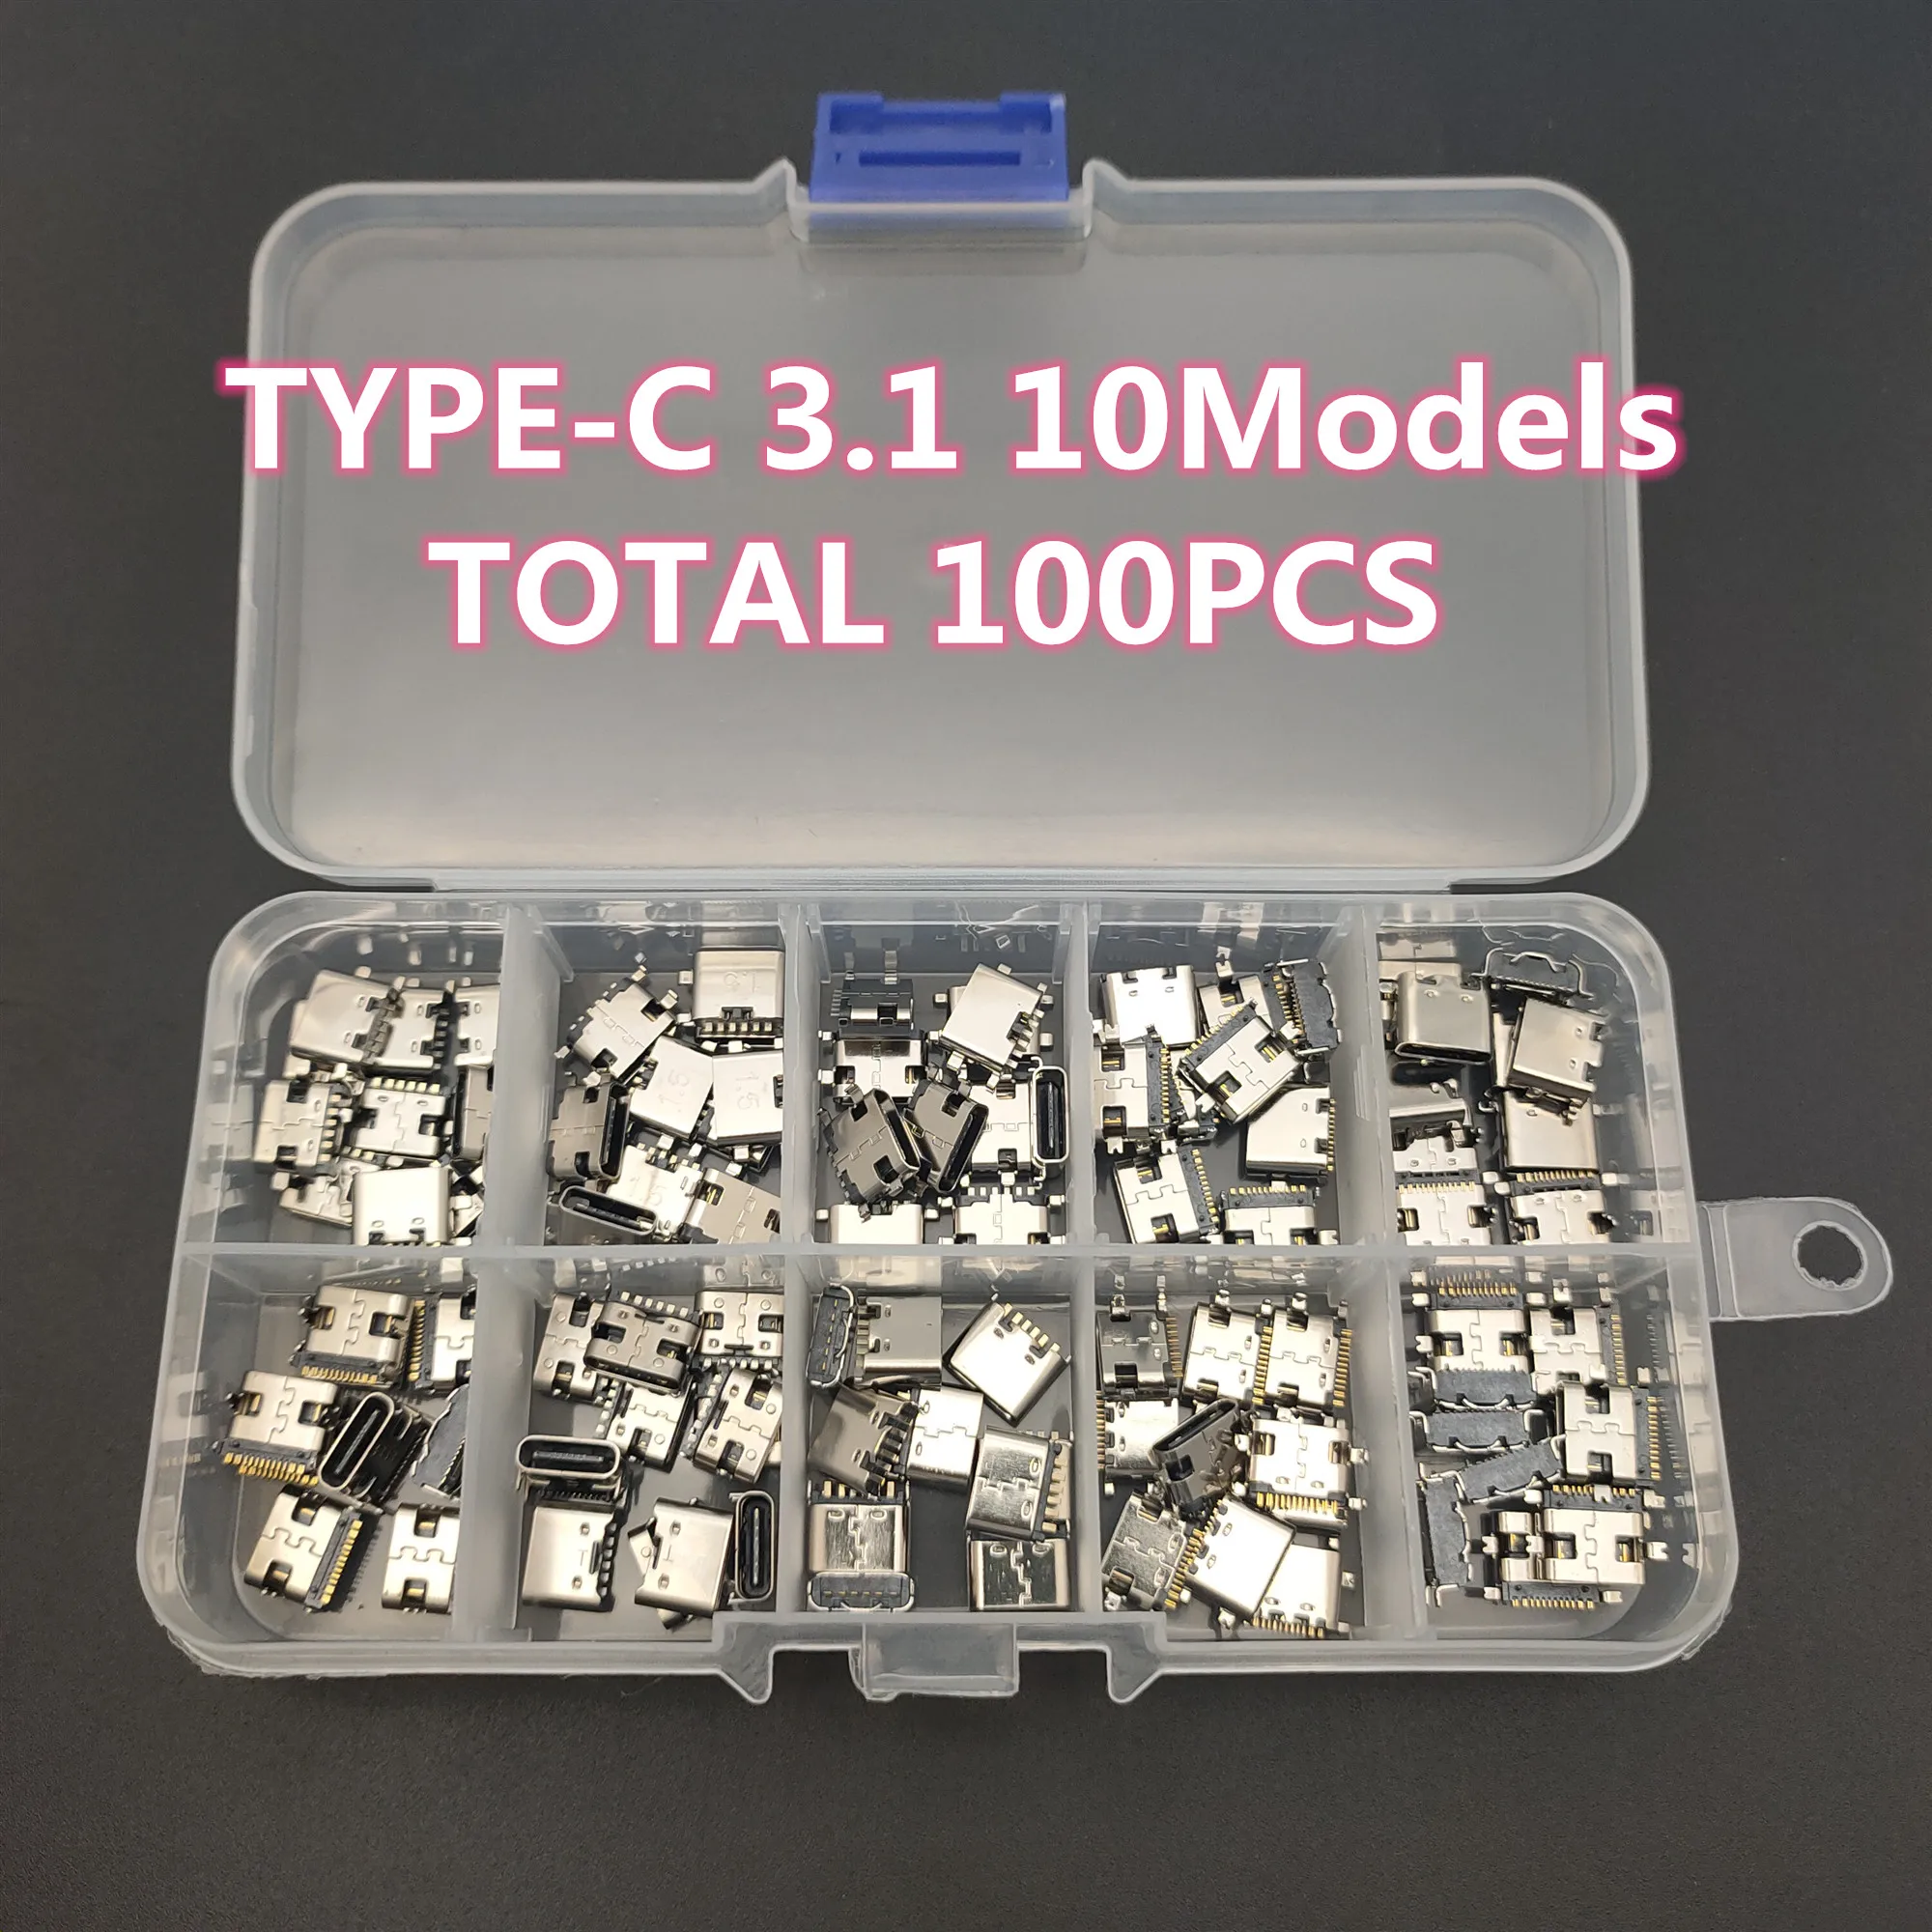 100pcs-lot-10models-type-c-usb-charging-dock-connectors-mix-6pin-and-16pin-use-for-mobile-phone-and-digital-product-repair-kits